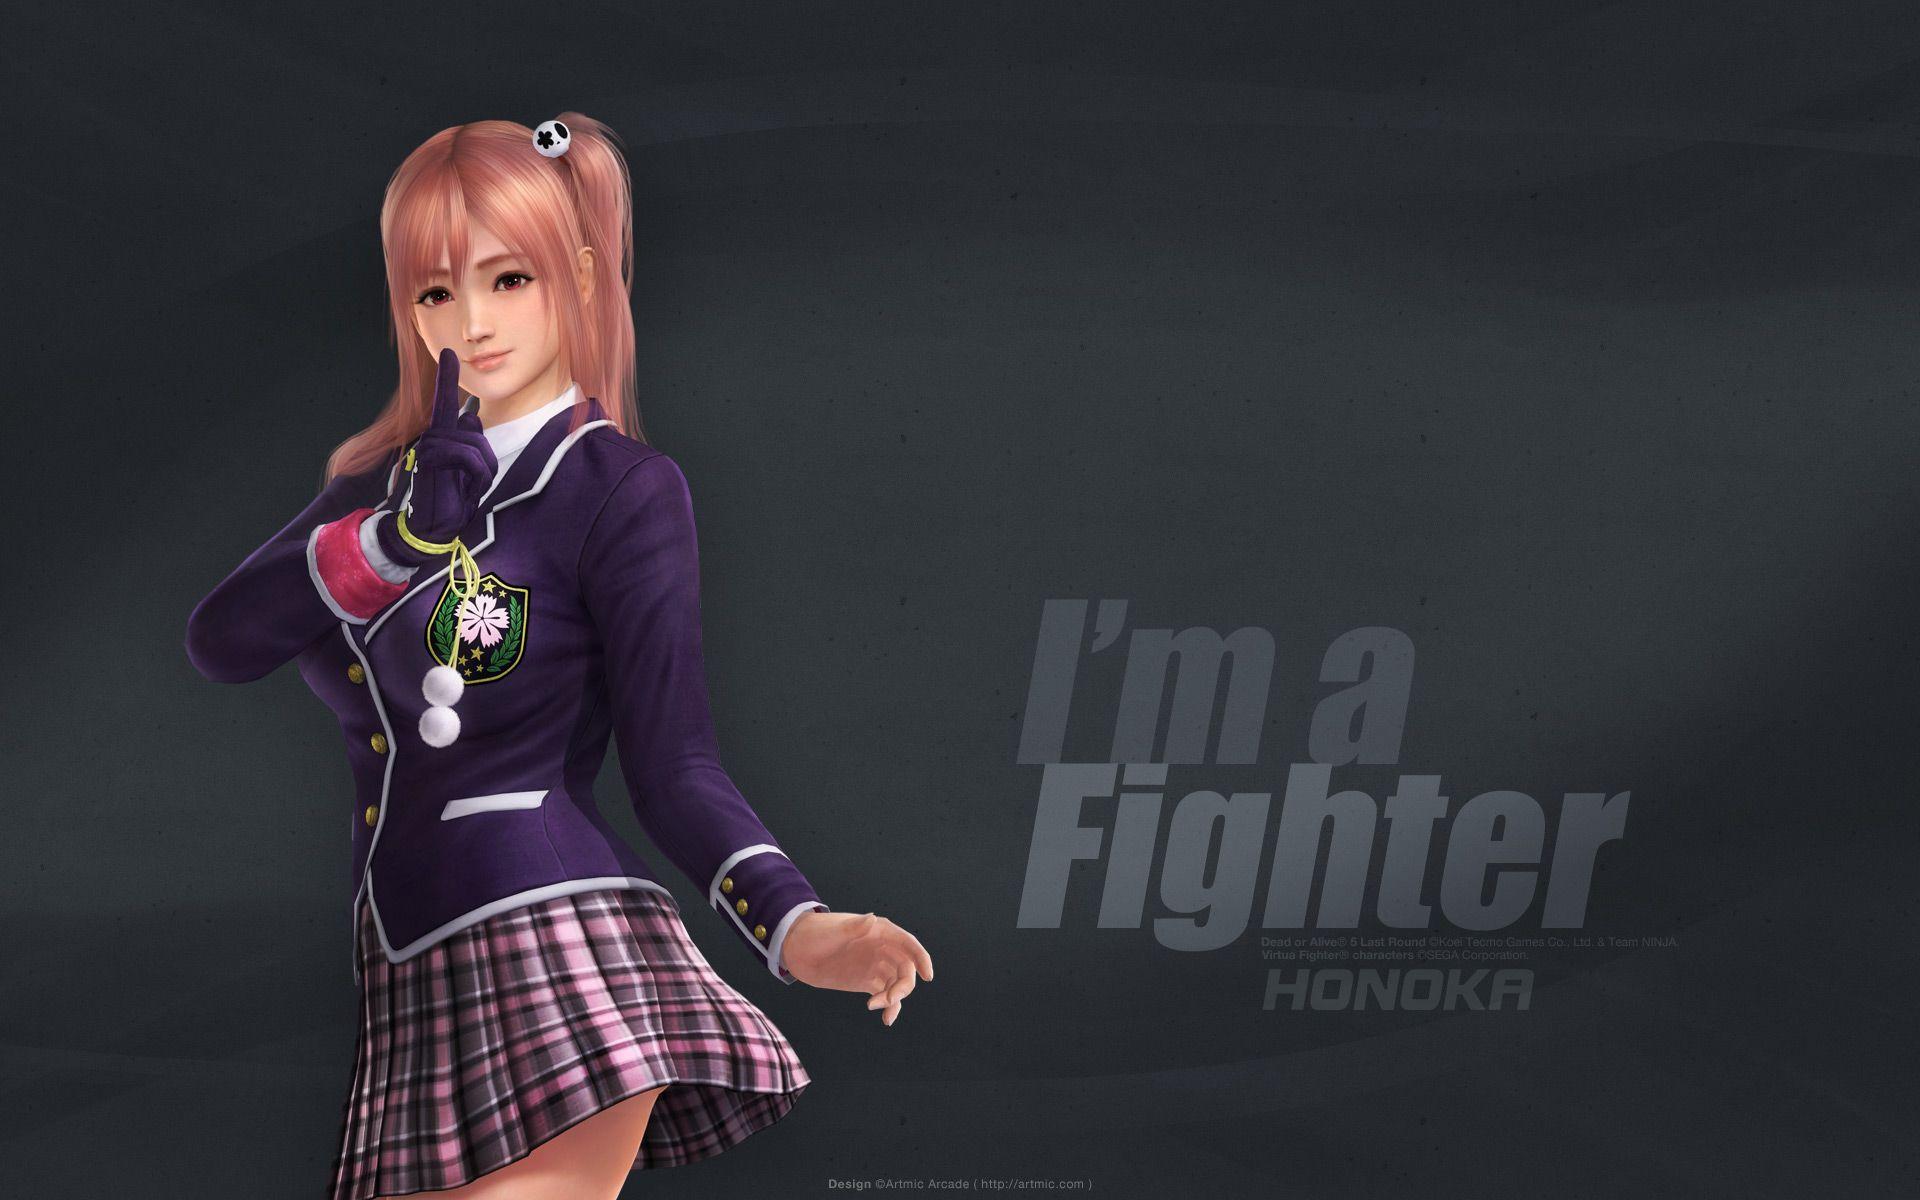 Dead Or Alive 5 Wallpapers Wallpaper Cave